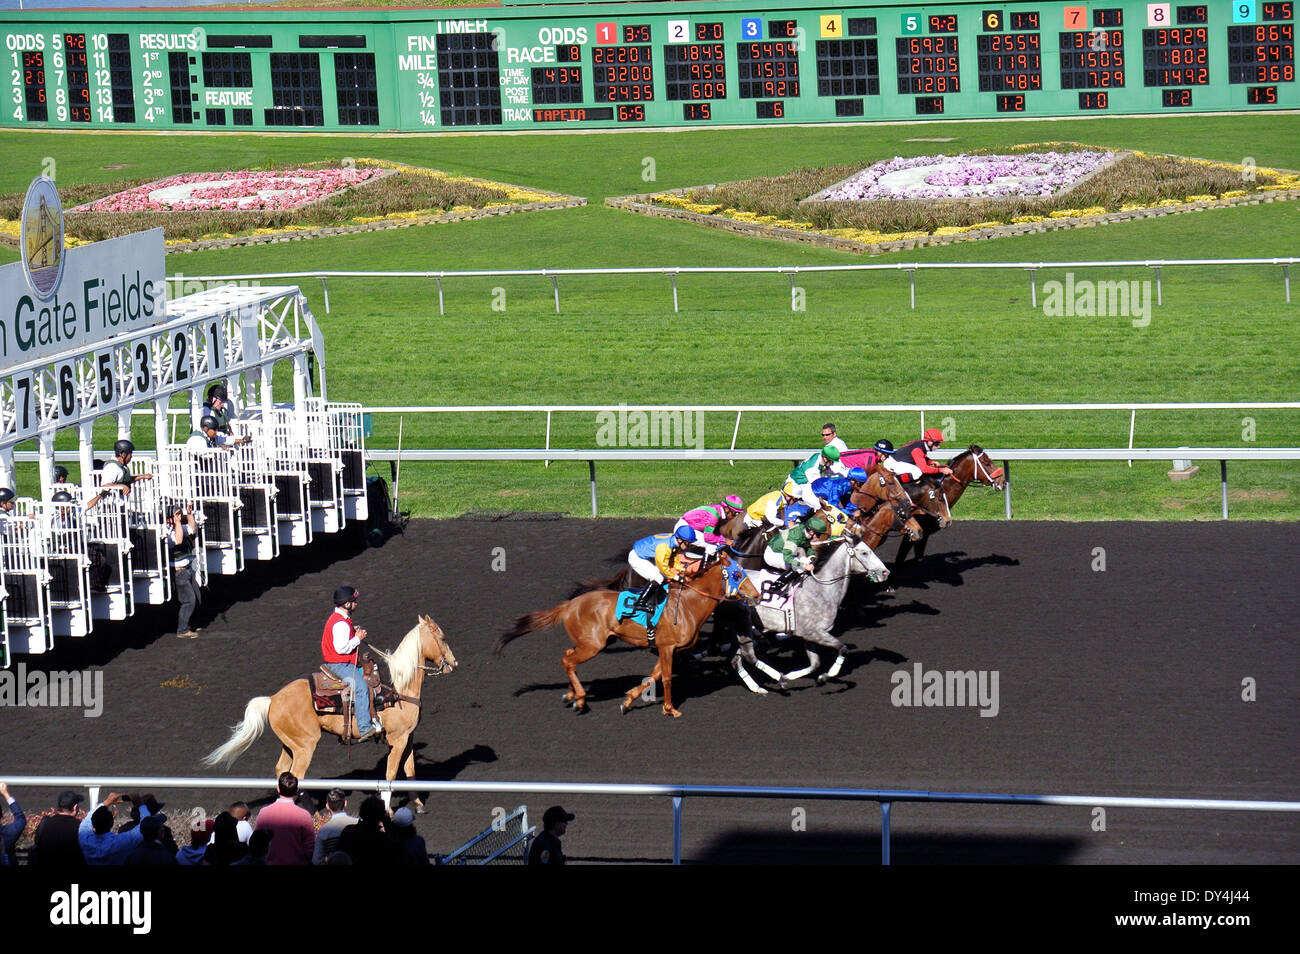 Race Horses Starting Gate High Resolution Stock Photography And Images Alamy